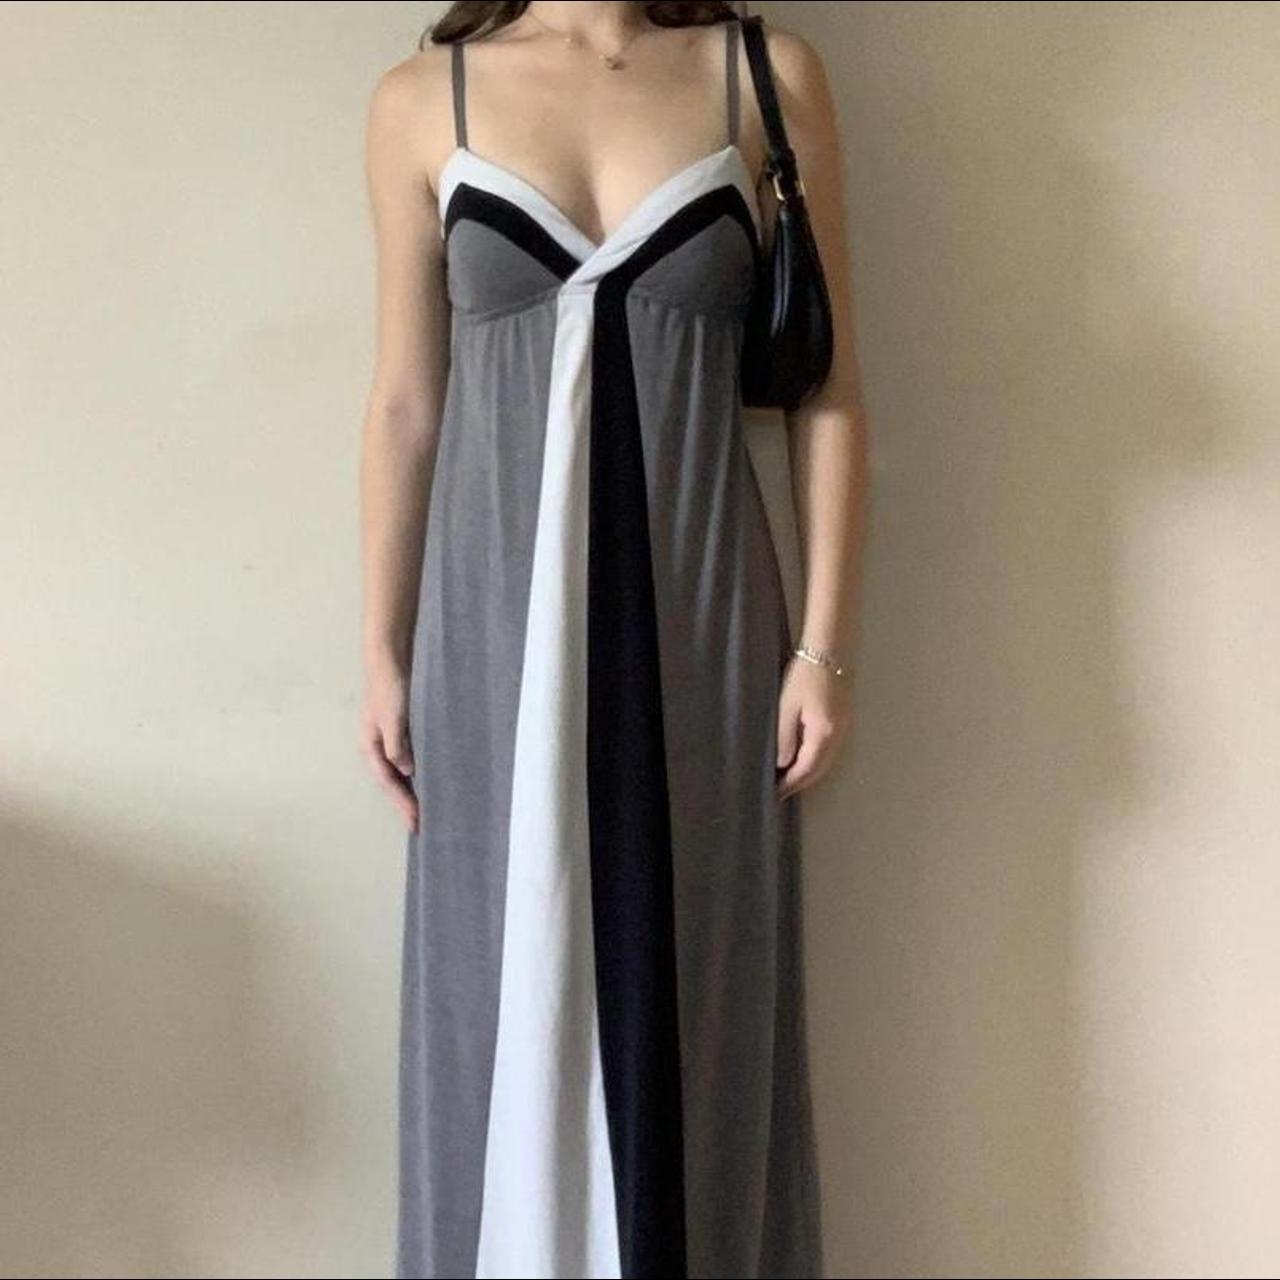 Poof Women's Grey and Black Dress